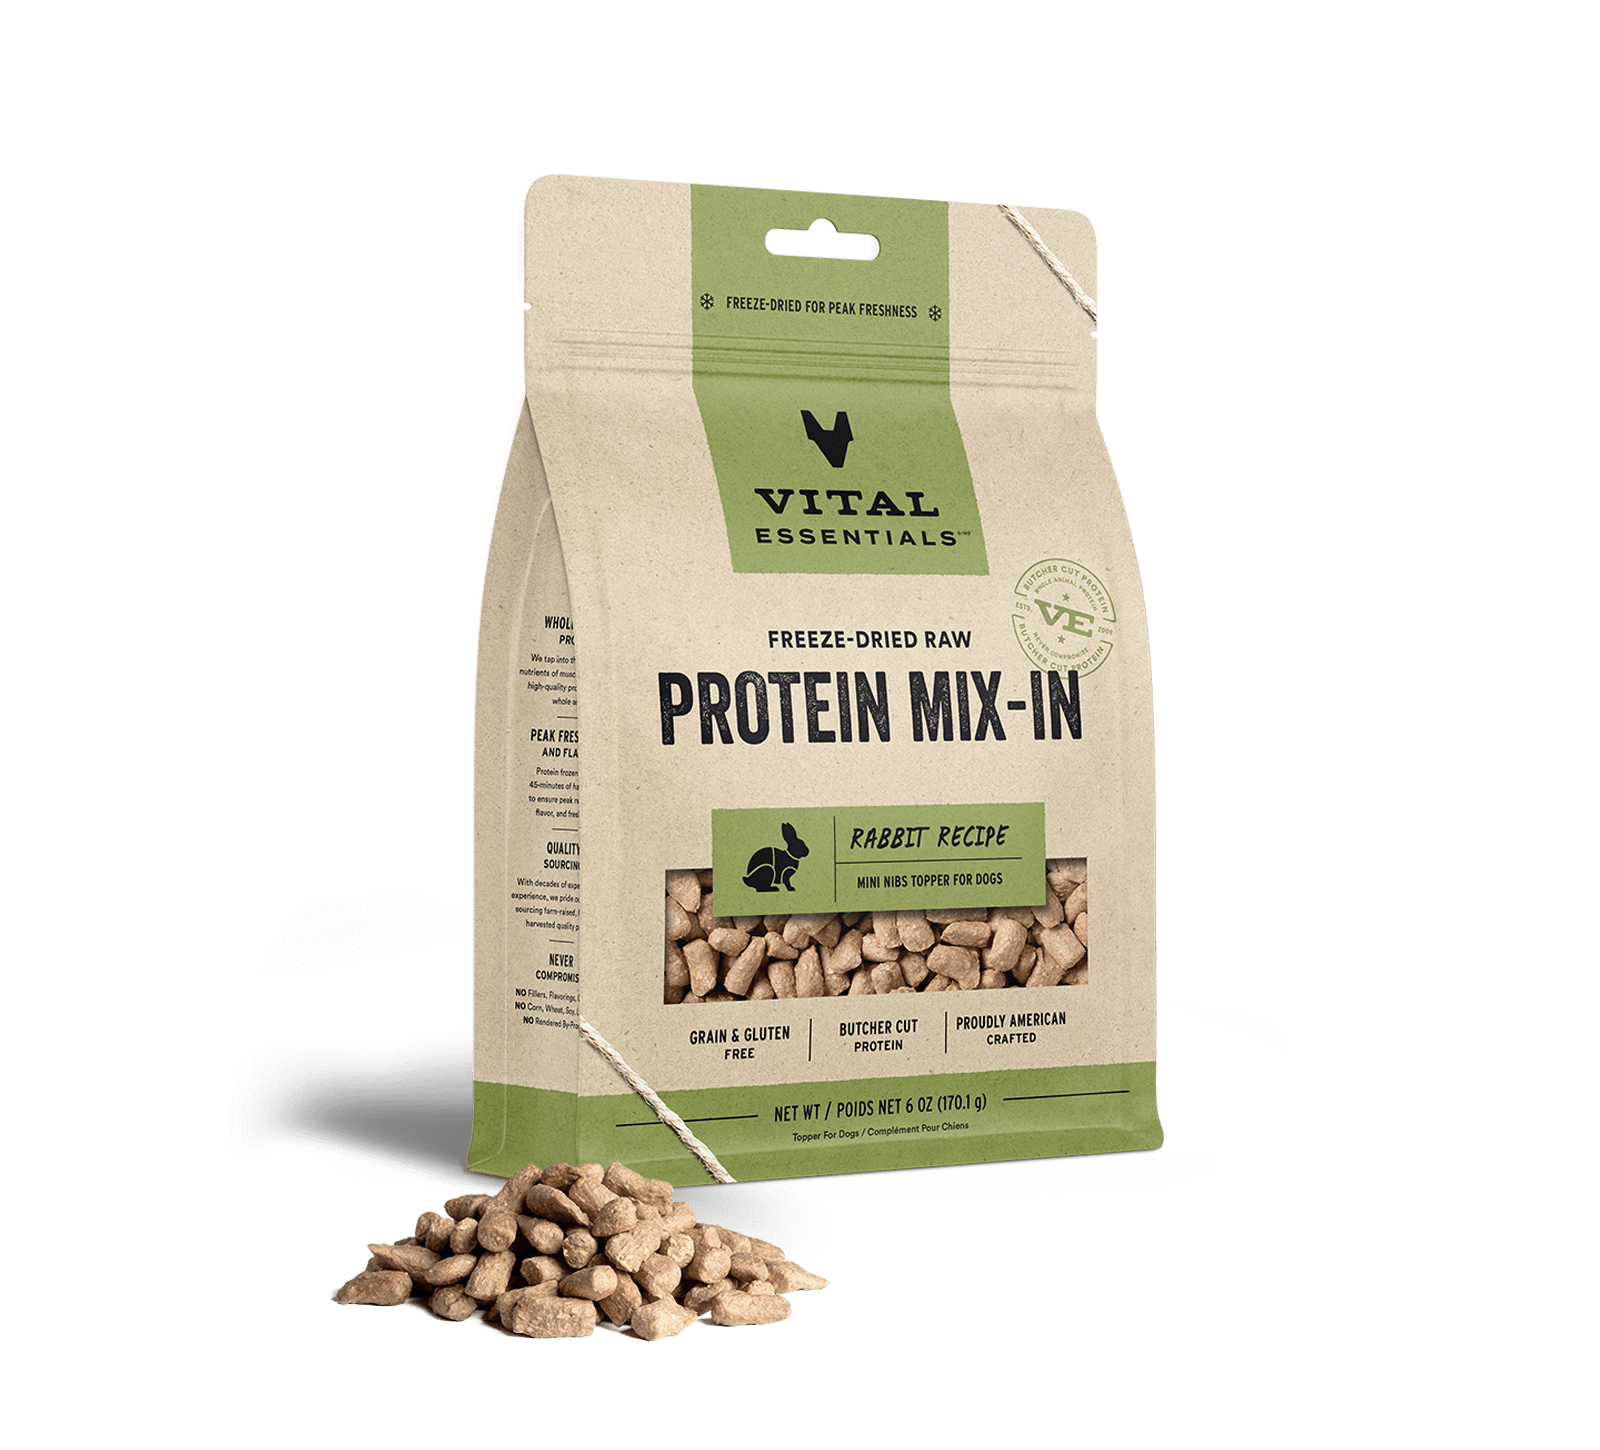 Vital Essentials Freeze-Dried Raw Protein Mix-In Rabbit Recipe Mini Nibs Topper for Dogs, 6 oz - Items on Sale Now